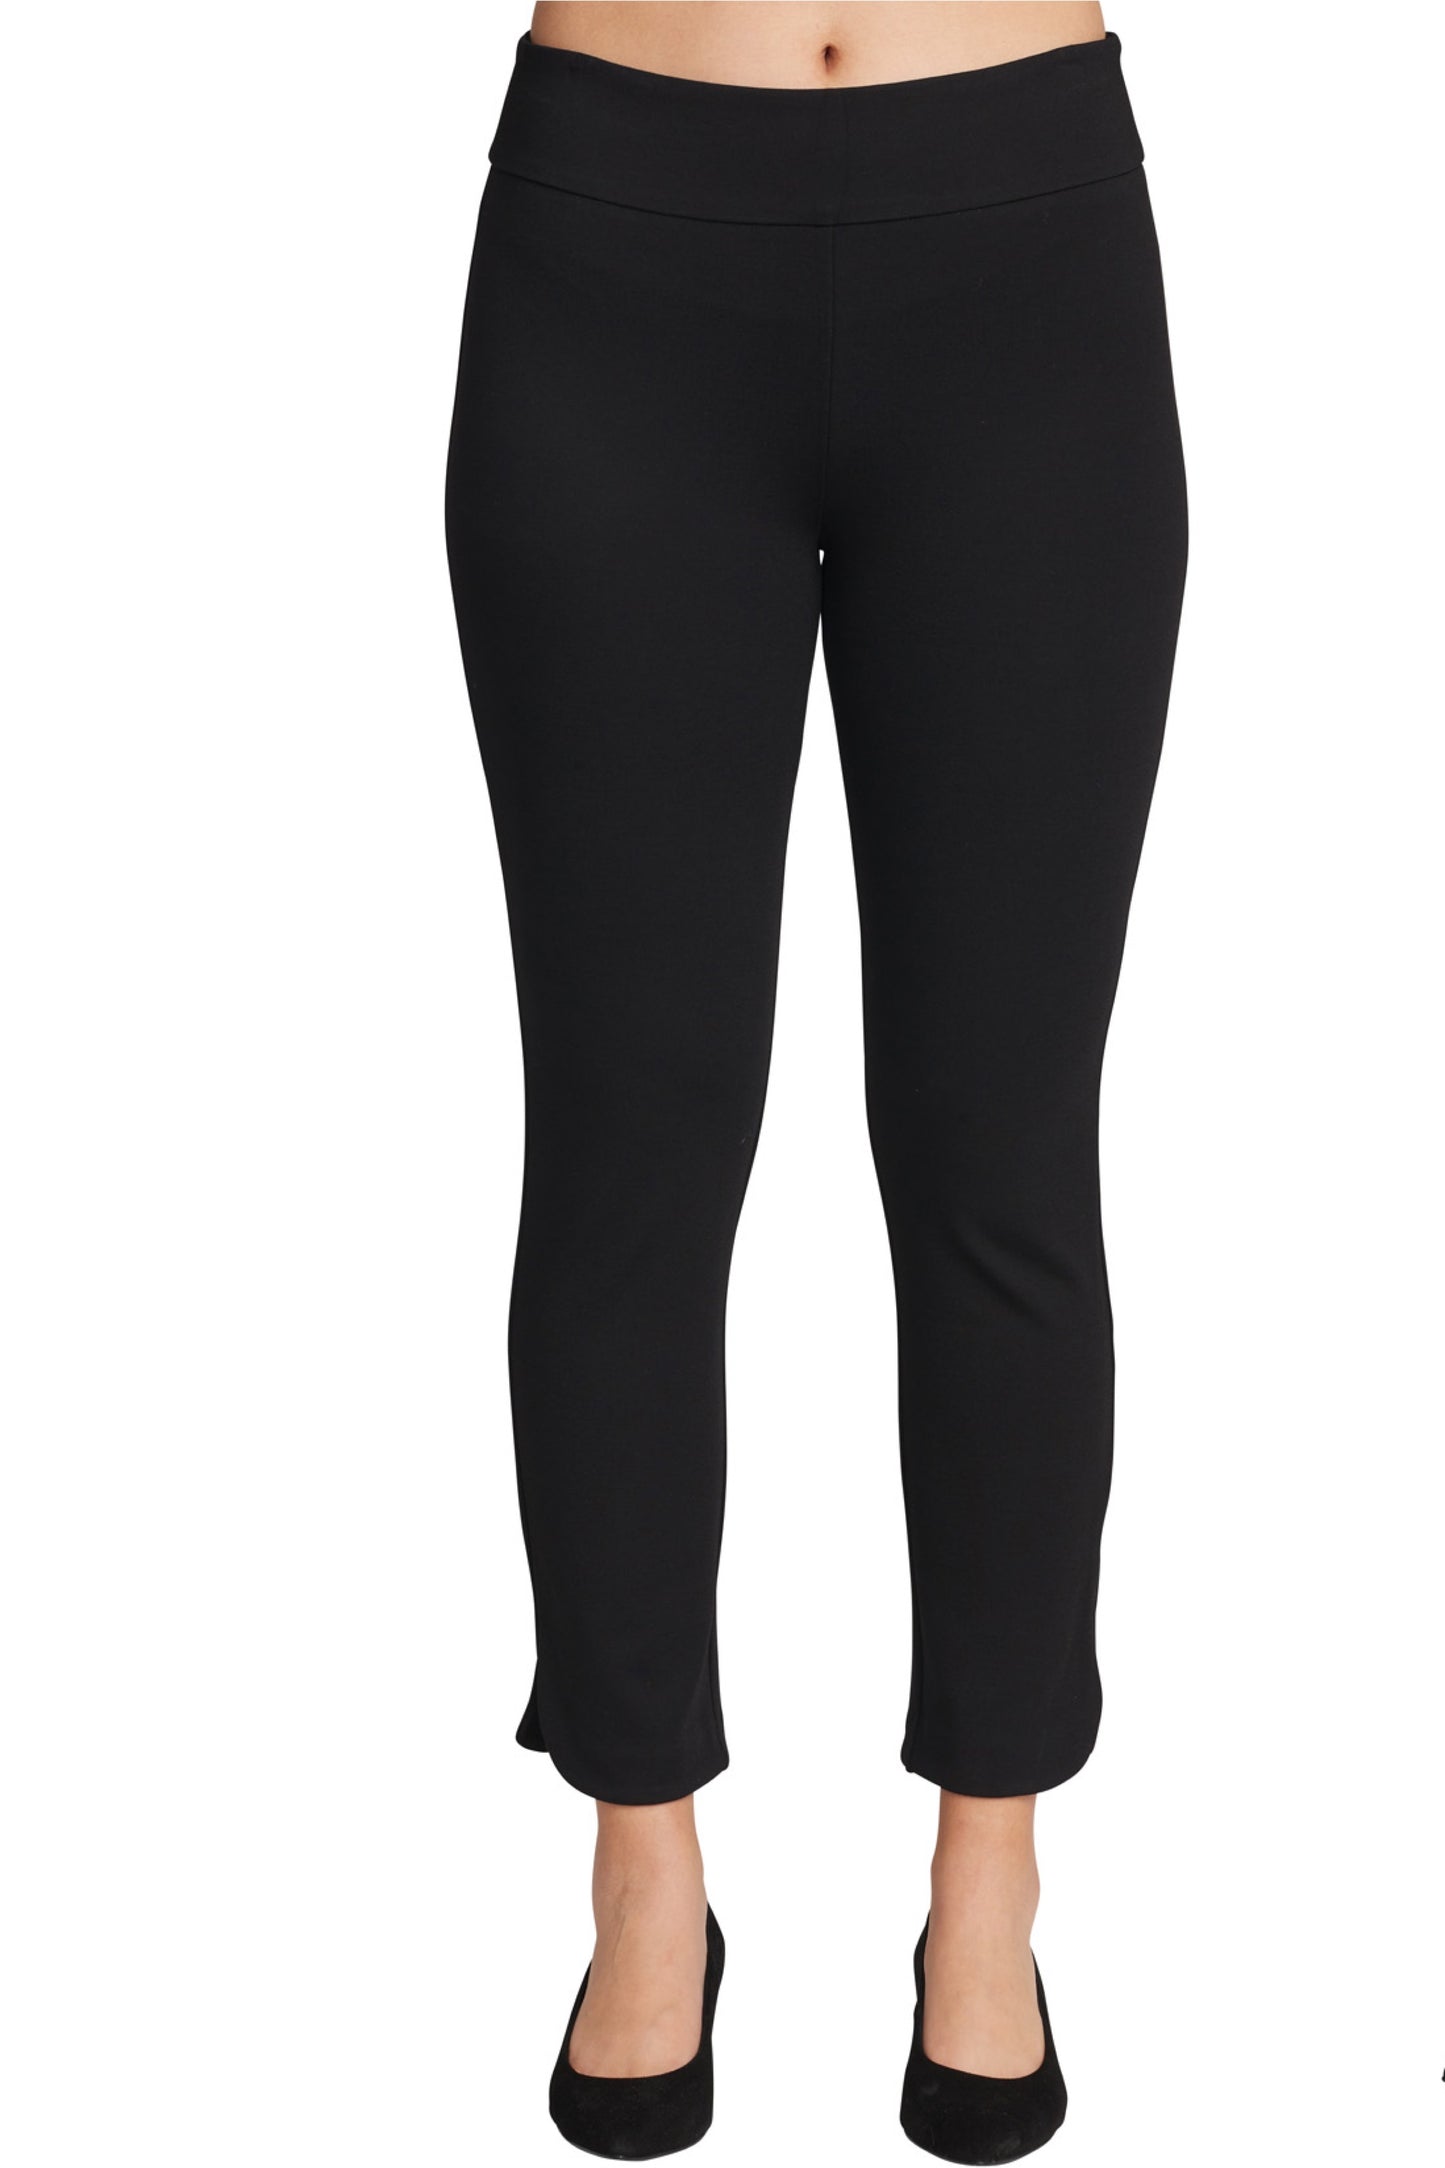 BLACK KNIT PULL ON PANT WITH SLIT BOTTOM